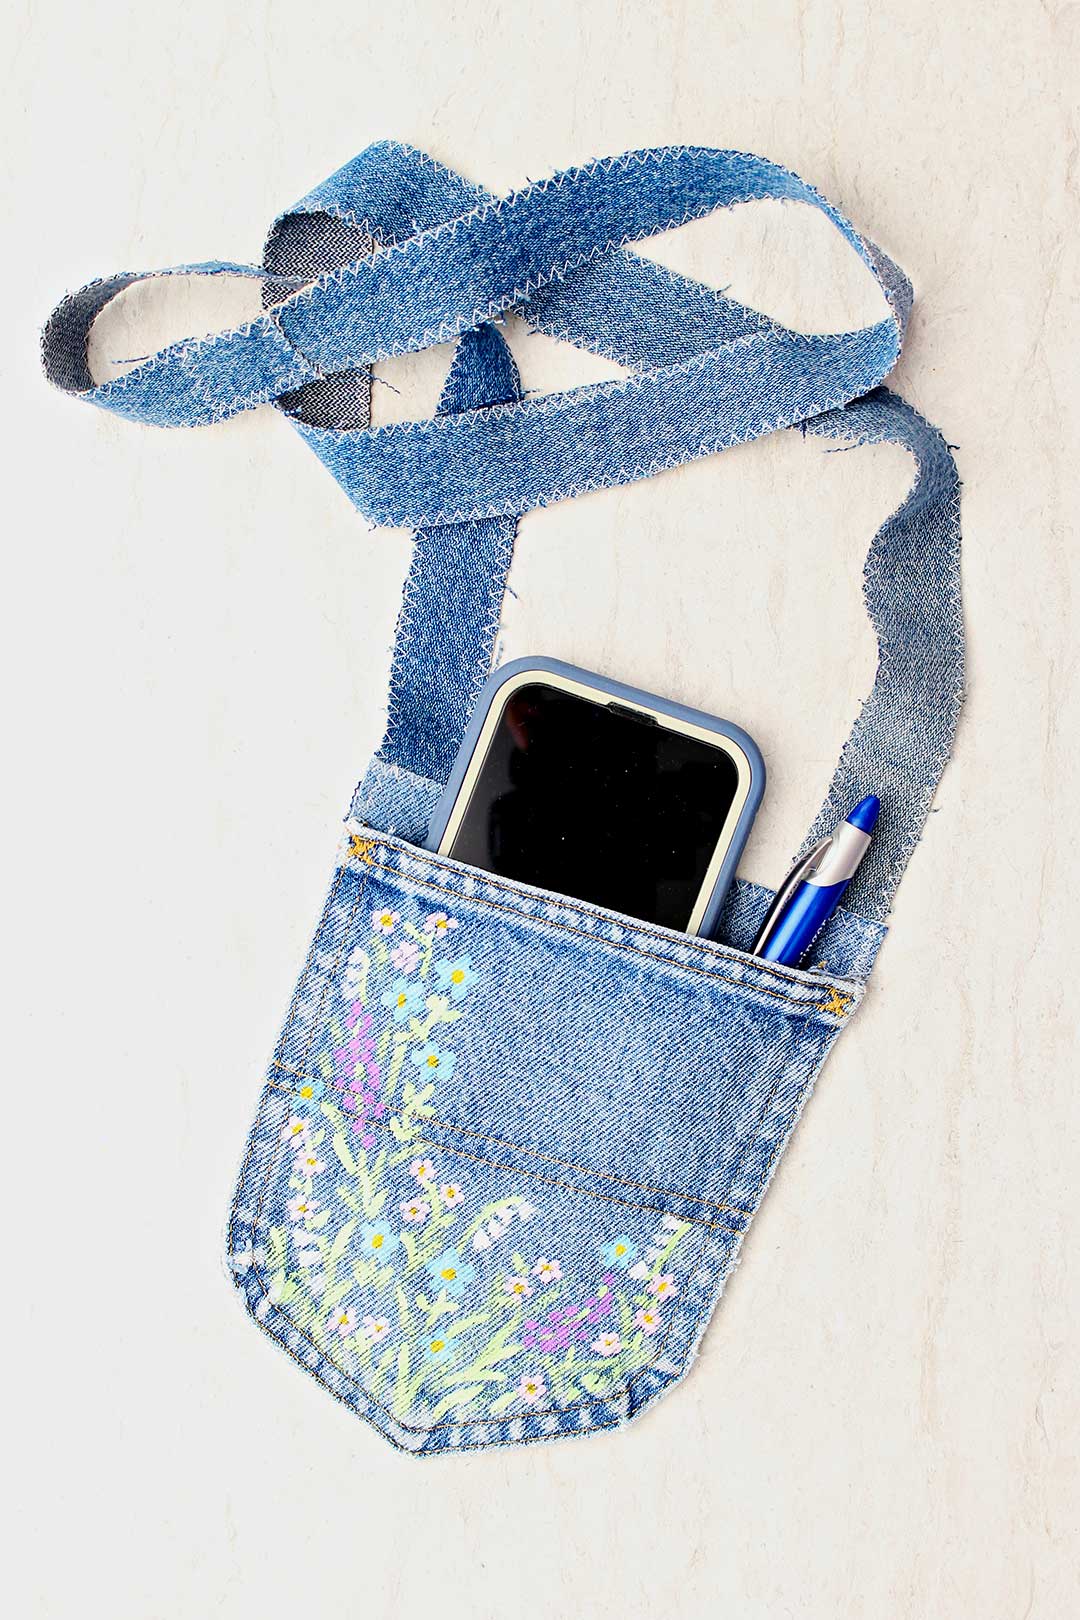 DIY Handbag Sewing Pattern, Slouchy Jeans Bag, Hobo Bag Printable PDF  Pattern and Instructions, Easy Photo Tutorial Download - Etsy